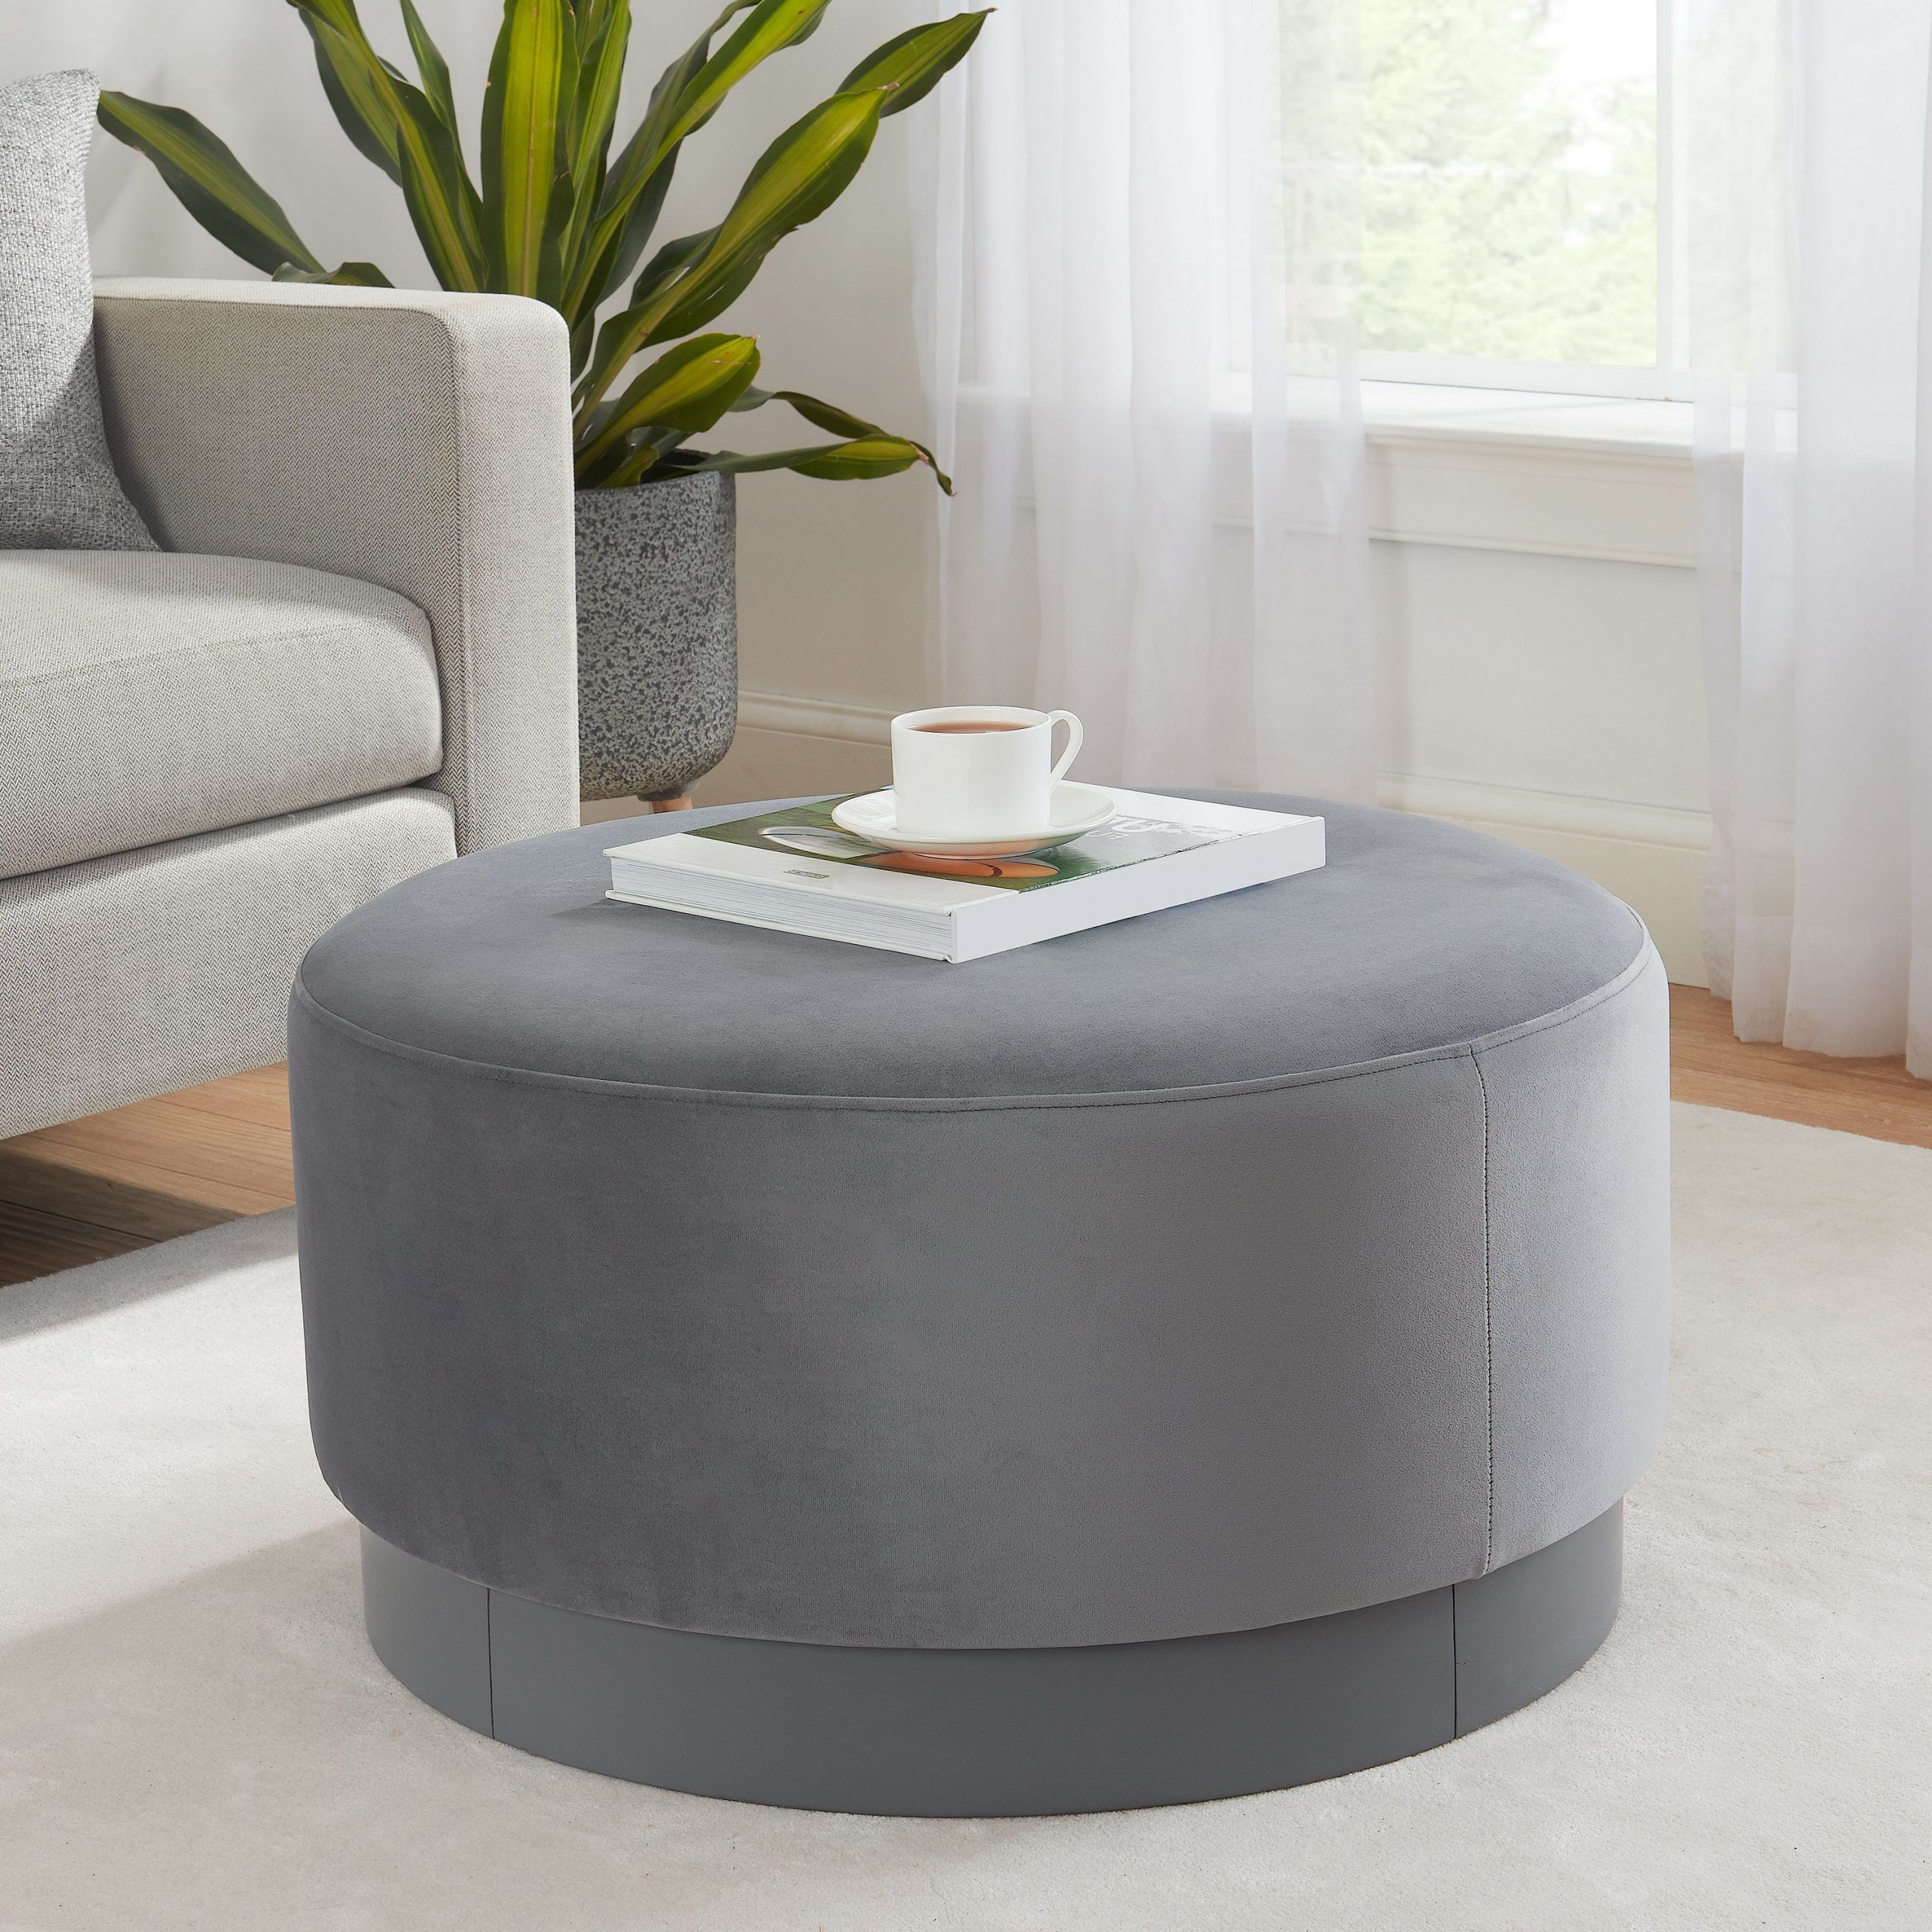 Well Known Better Homes & Gardens Addison Large Round Ottoman, Multiple Colors Intended For Wool Round Pouf Ottomans (View 6 of 10)